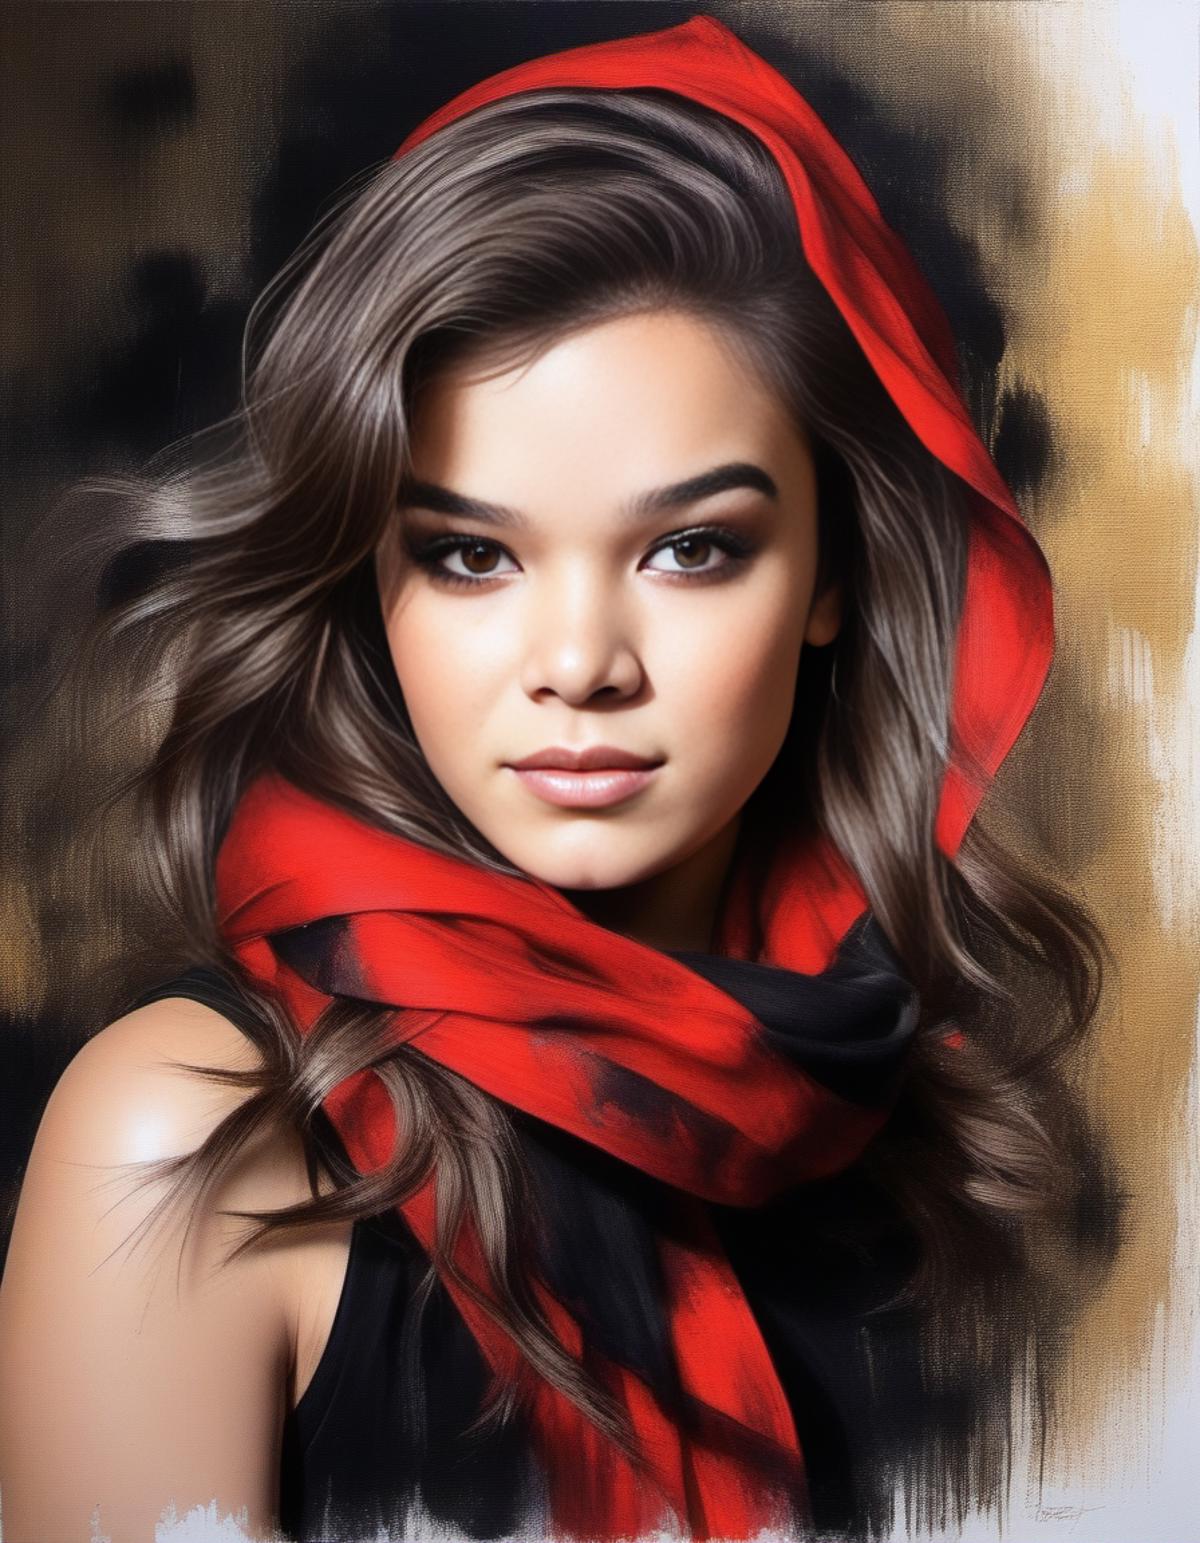 Hailee Steinfeld image by parar20